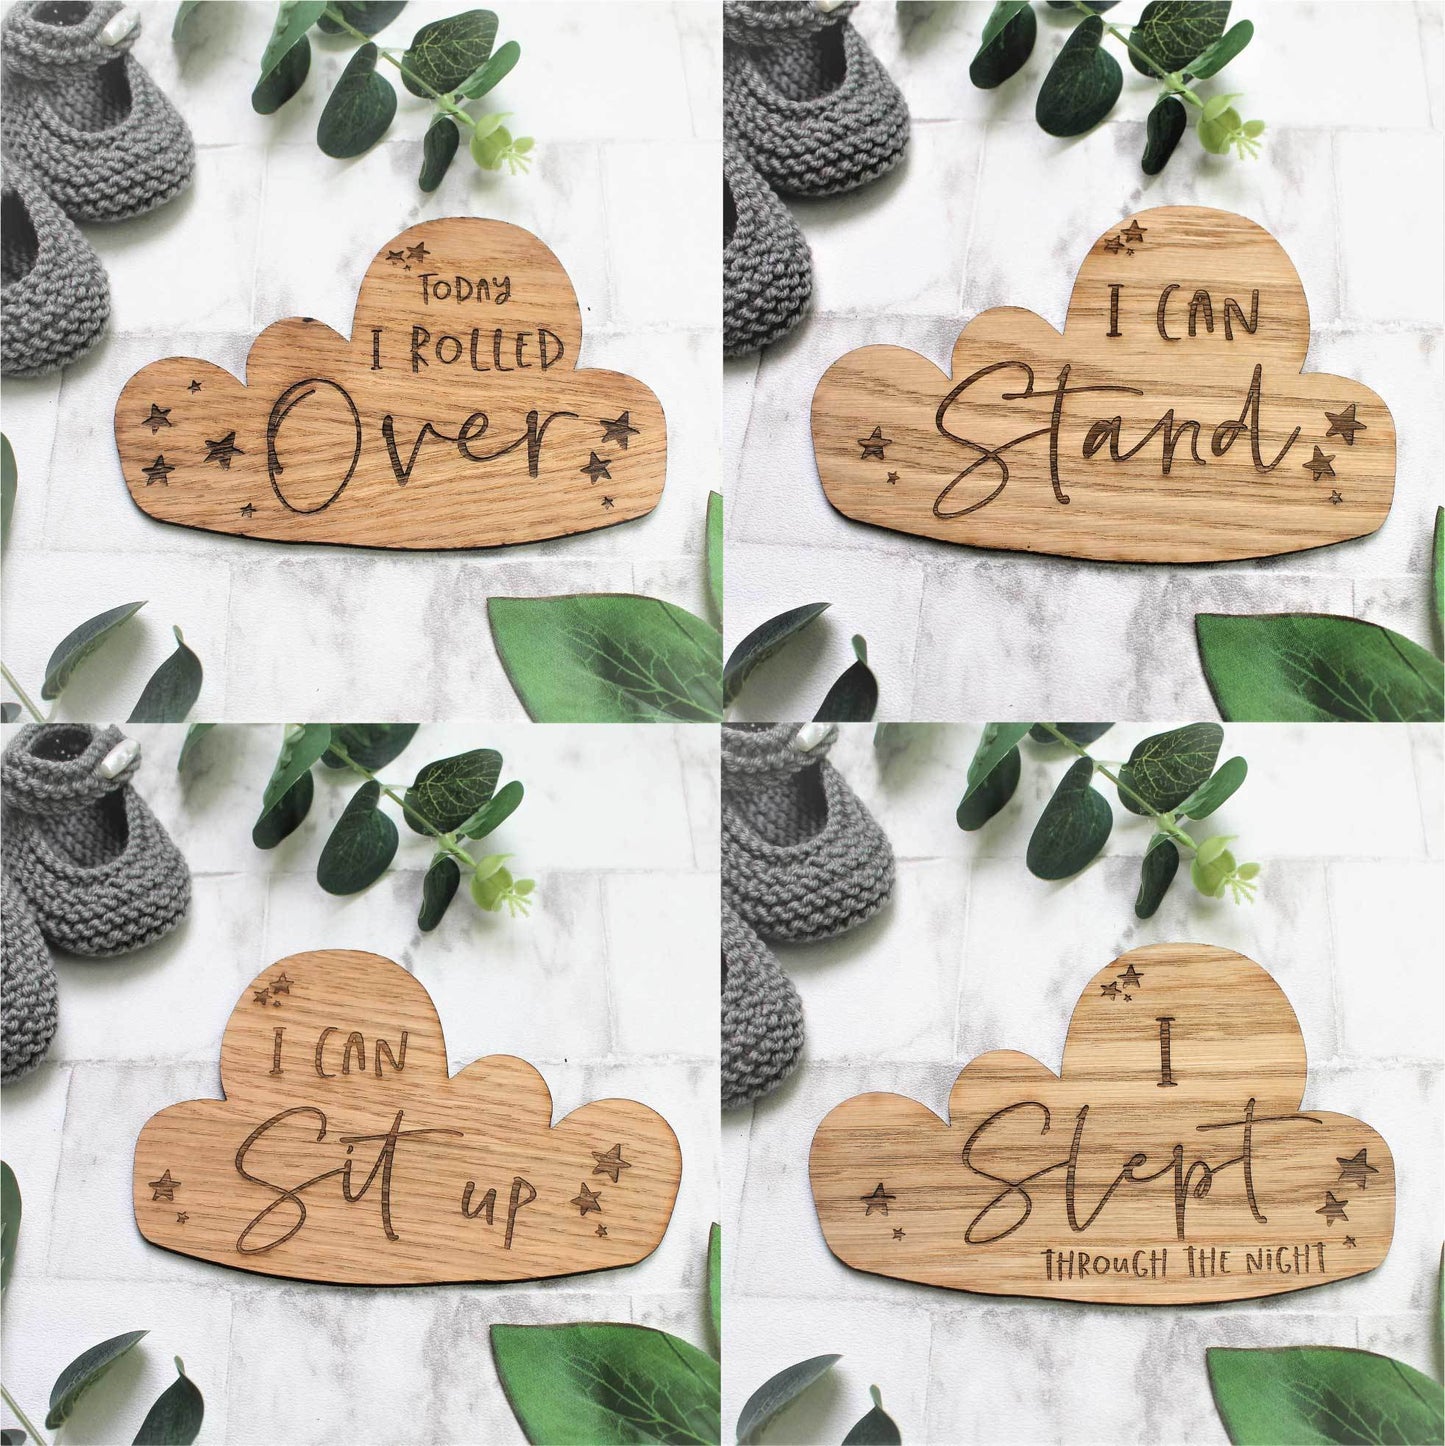 baby milestone / moments wooden engraved baby shower gifts, I can sit up, I slept through the night